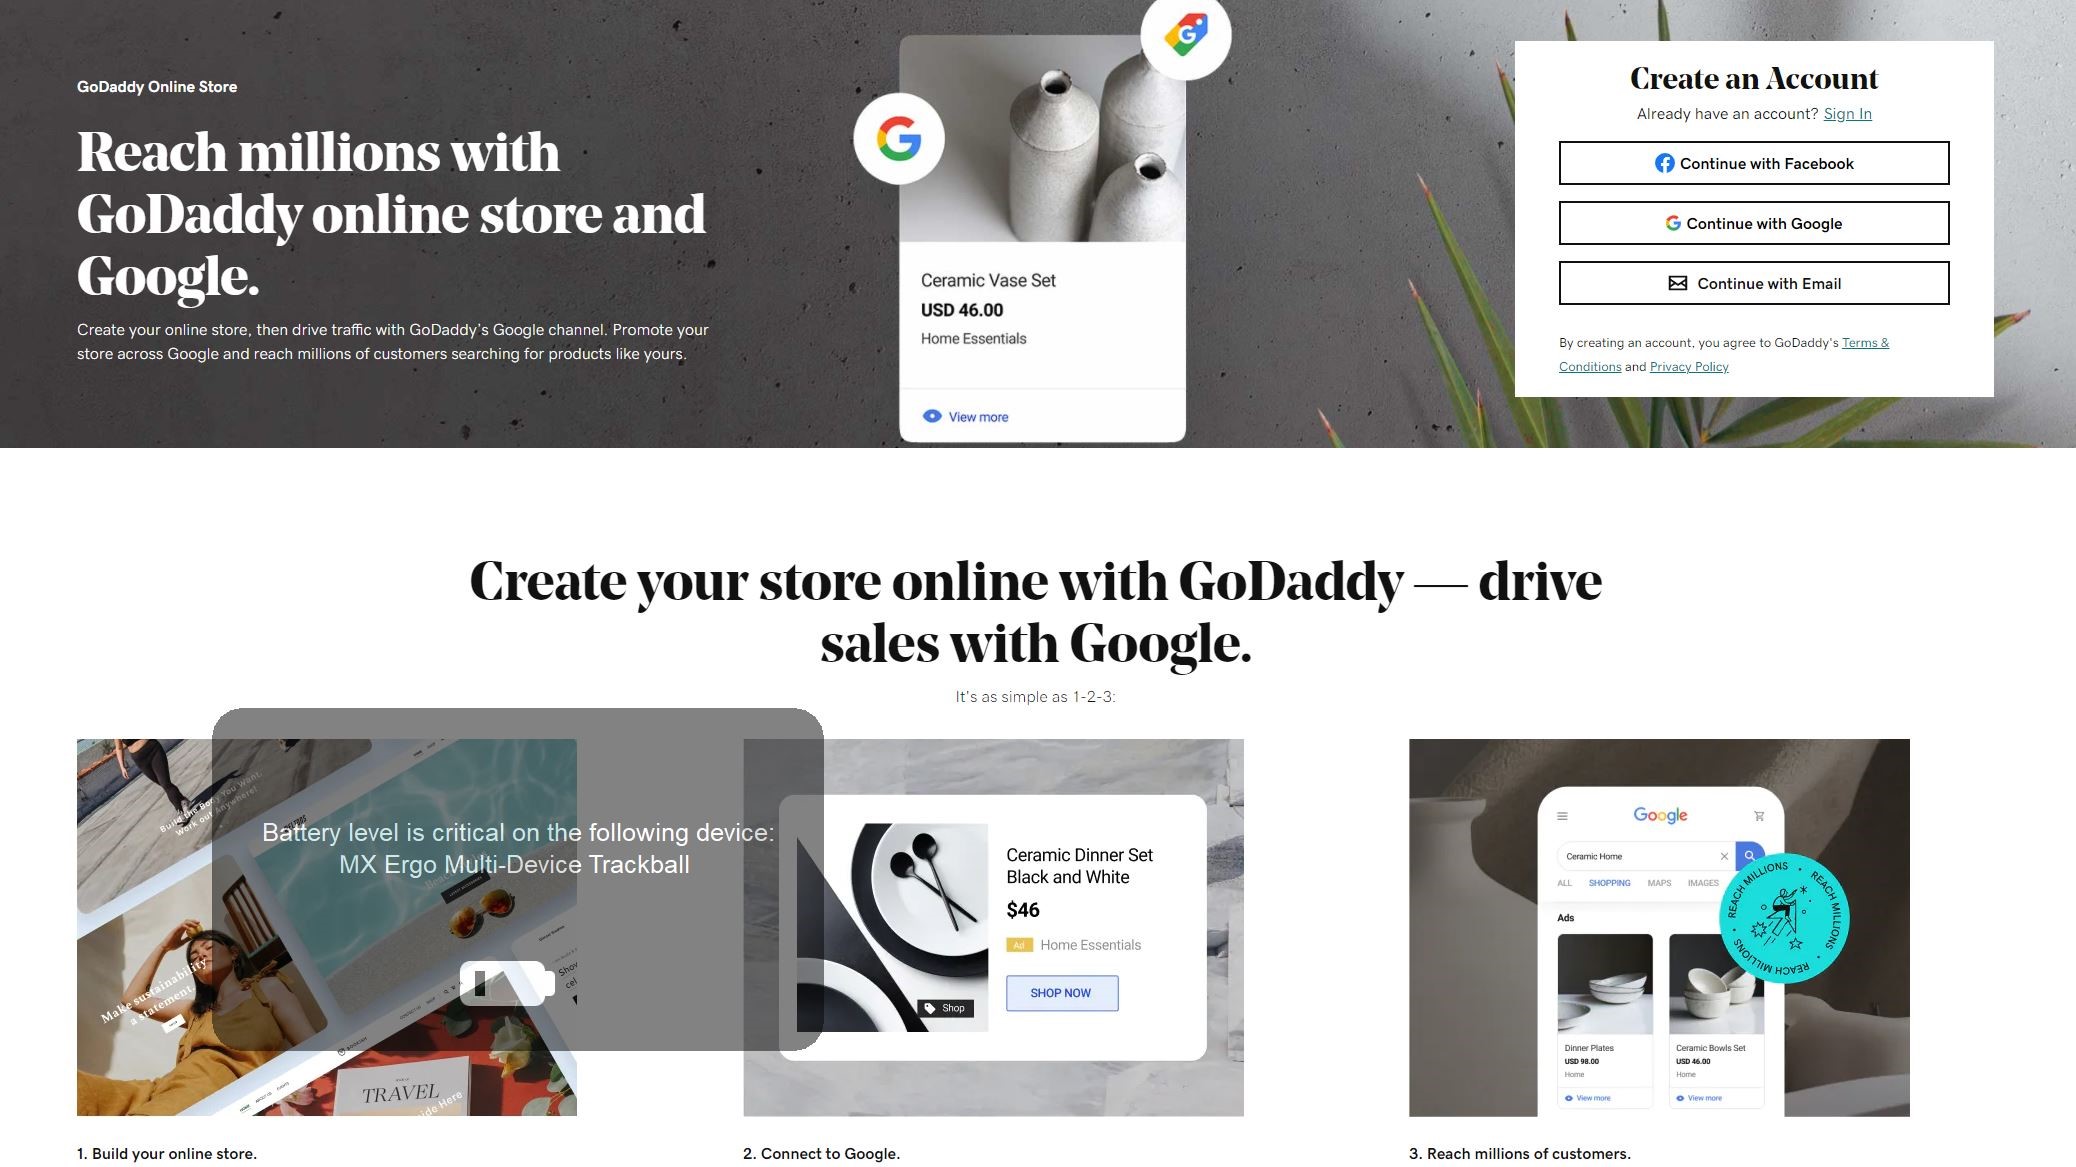 GoDaddy and Google extend partnership to help SMBs boost online sales